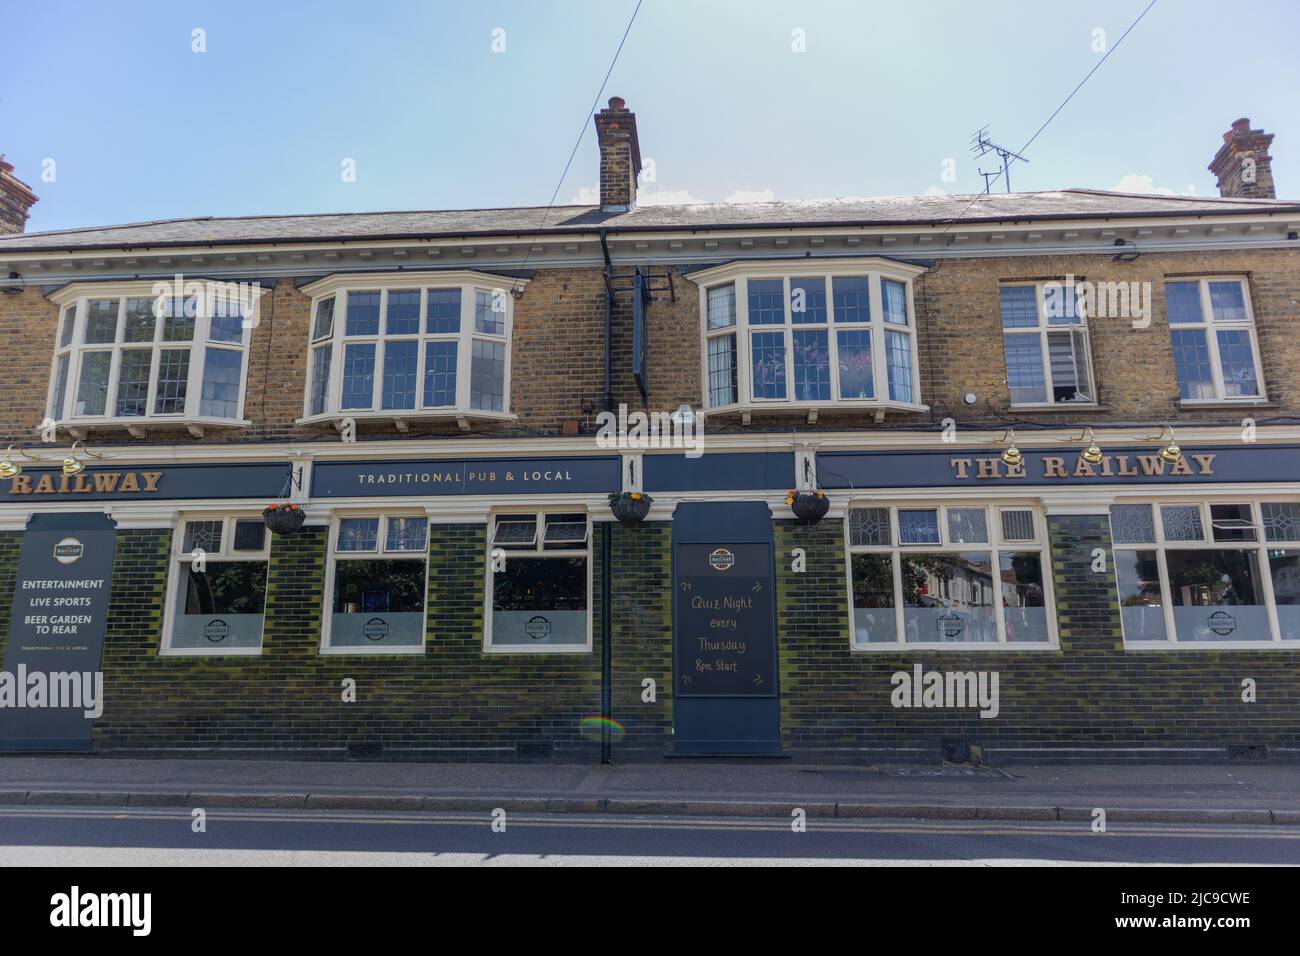 Southend on Sea, UK. 11th Jun, 2022. The Railway Pub, Prittlewell. Scenes near Prittlewell Station, Southend on Sea, the area Simon Dobbin was left with permanent brain damage following an assault after a Southend Utd vs Cambridge Utd match on 21st March, 2015. Mr Dobbin died on 21st October, 2020. He was 48 years old. Earlier in the week, 10th June 2022, Essex Police arrested five men in connection with the assault. Penelope Barritt/Alamy Live News Stock Photo